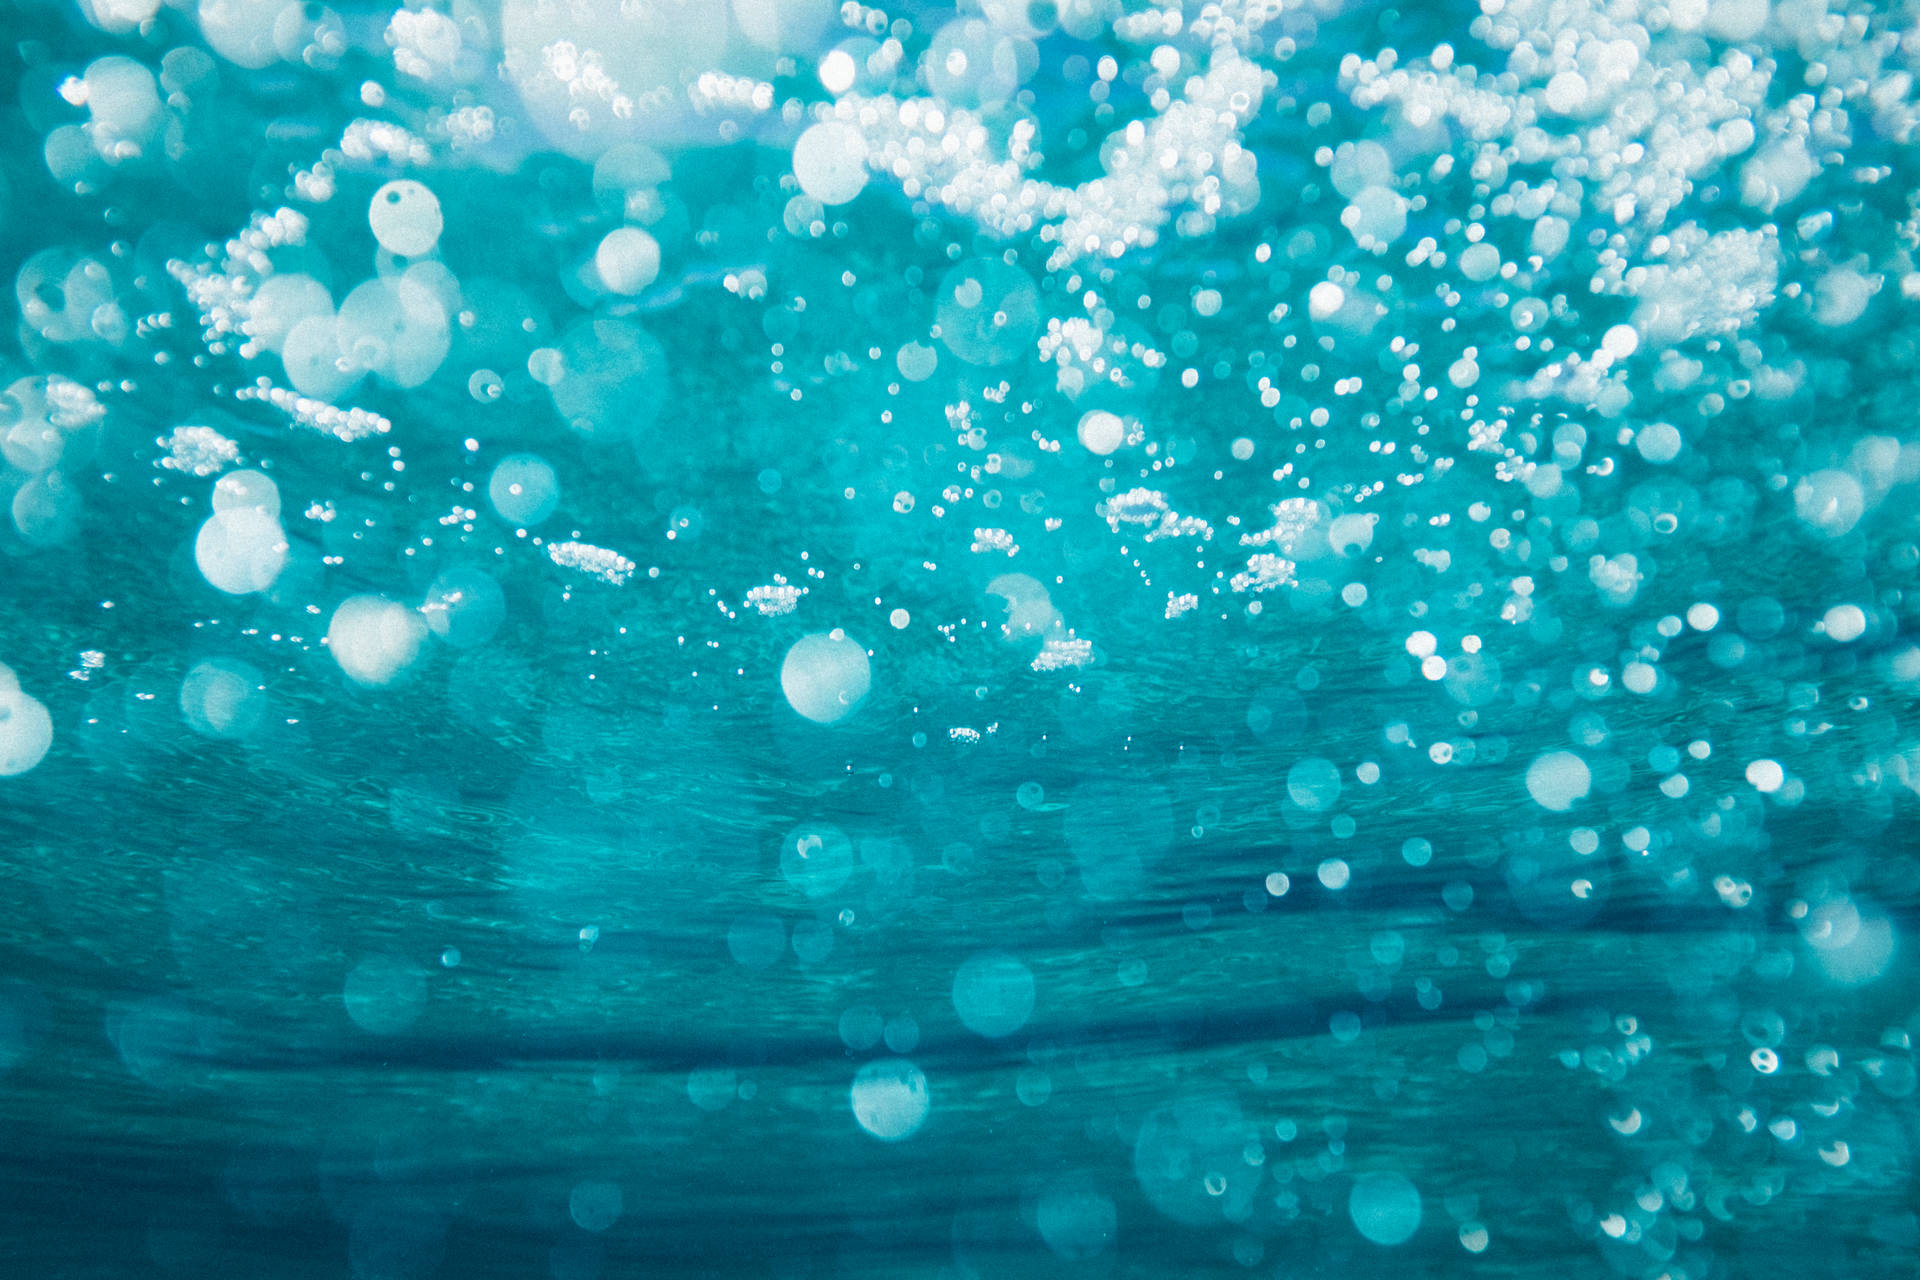 Dive Into The Bubbly Depths Of Water. Background